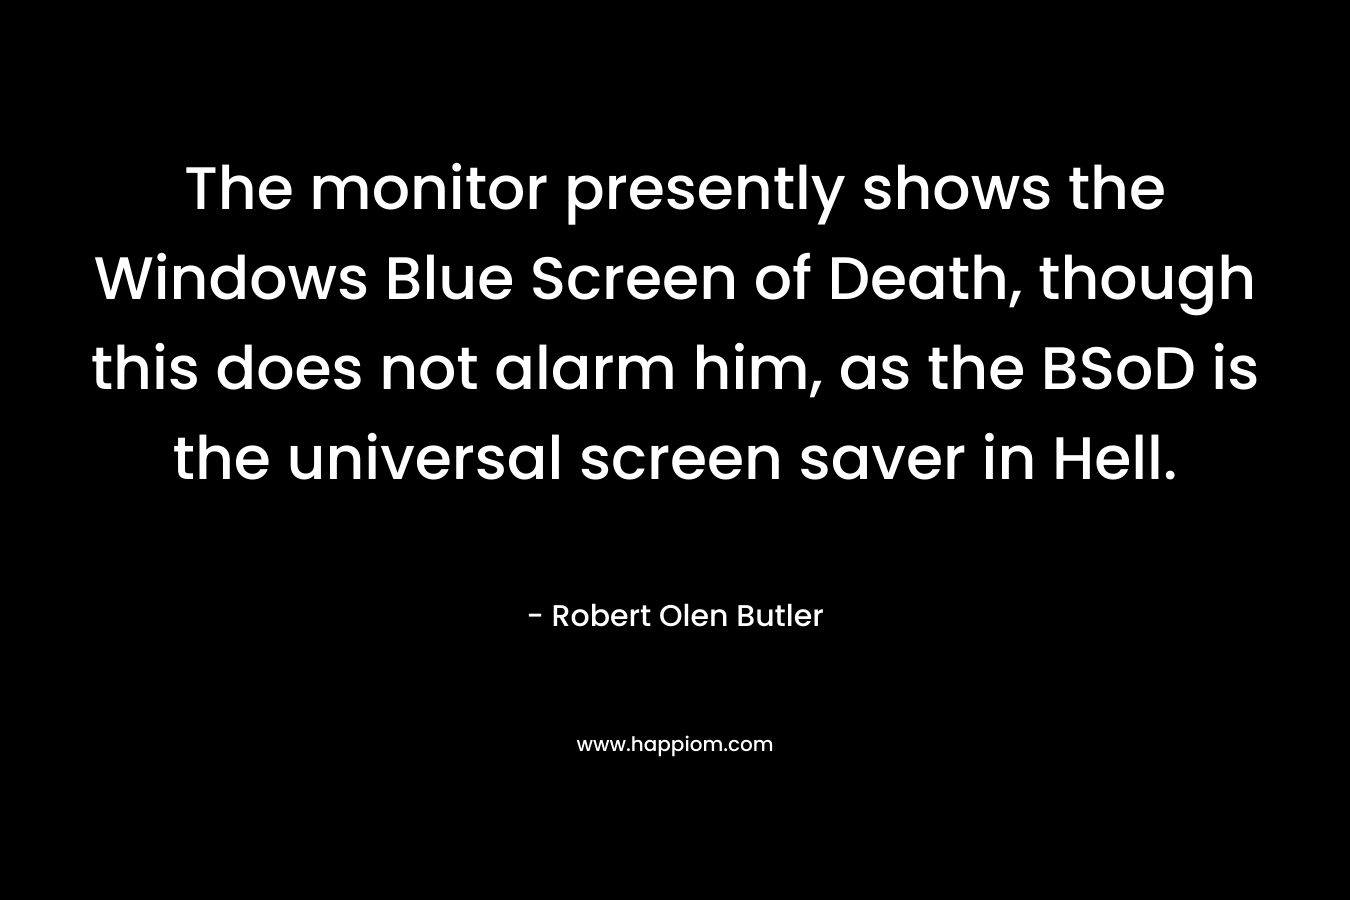 The monitor presently shows the Windows Blue Screen of Death, though this does not alarm him, as the BSoD is the universal screen saver in Hell. – Robert Olen Butler